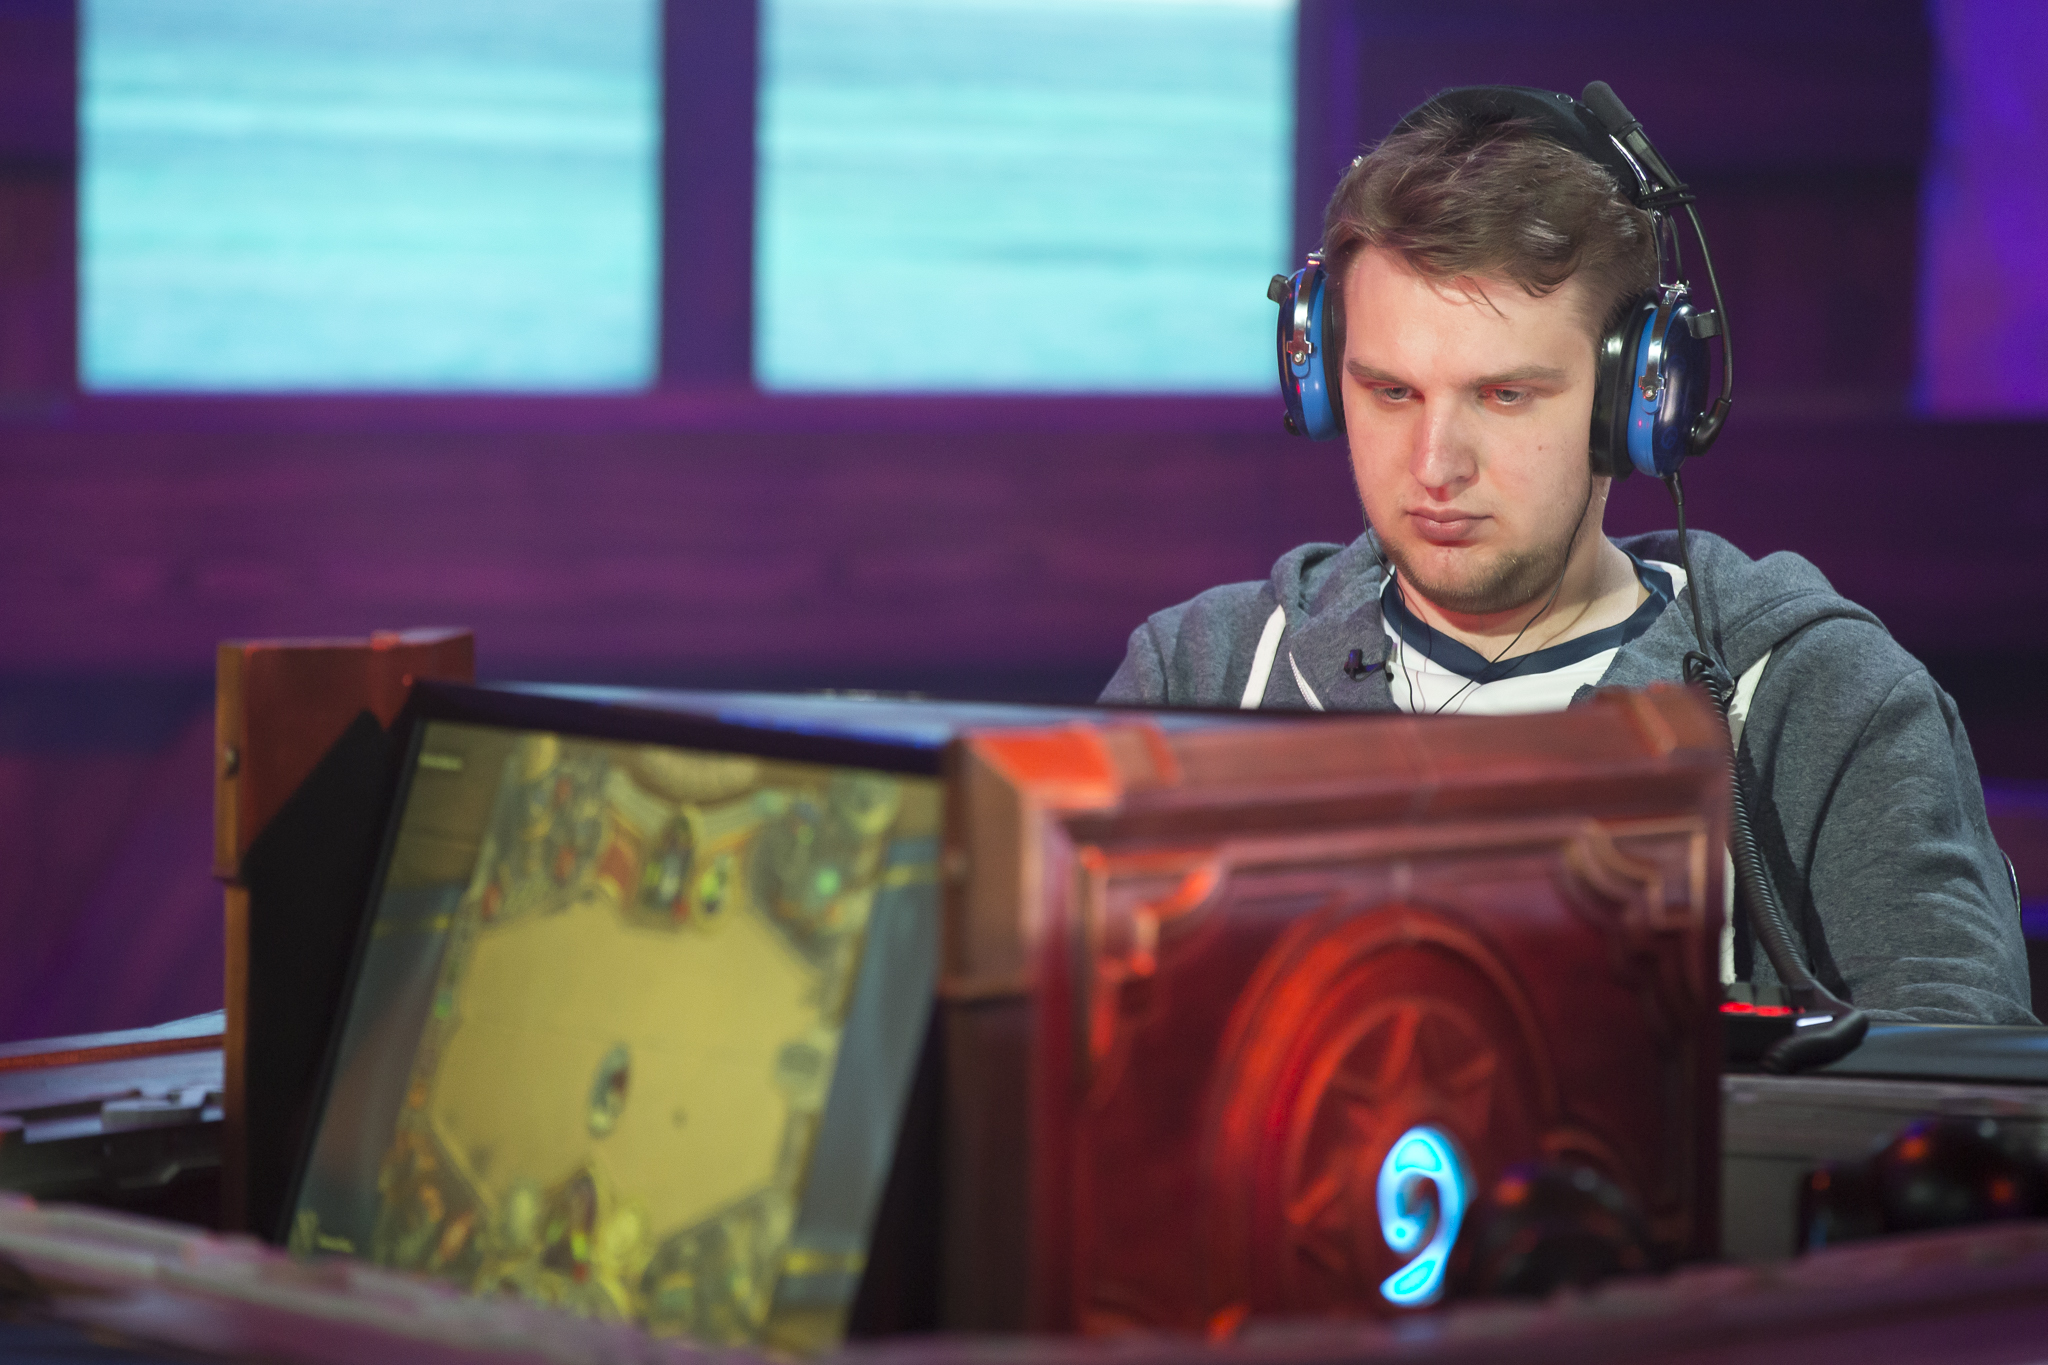 Hearthstone Playoffs Will Be Held In Sports Bars, Which Presents Some Problems